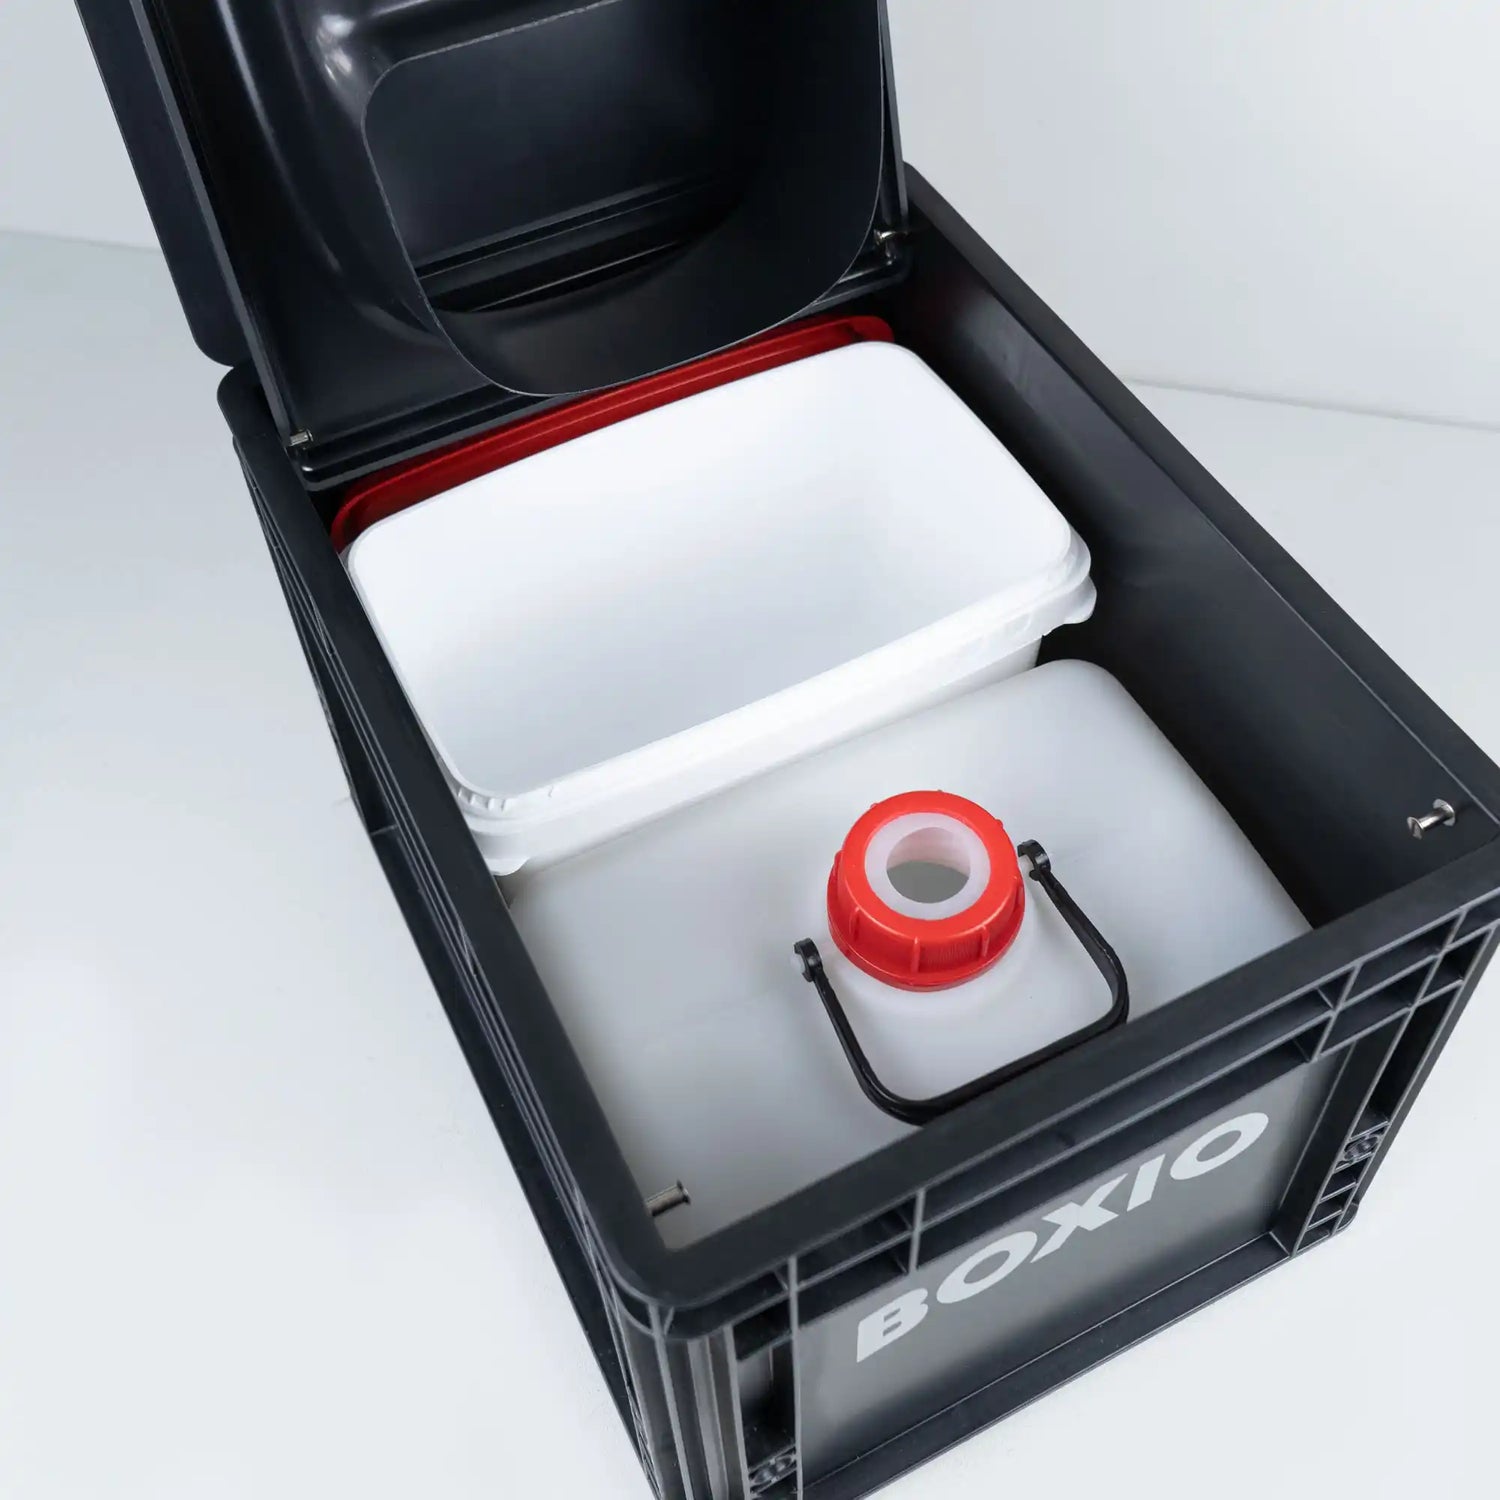 BOXIO - mobile separation toilet for campers